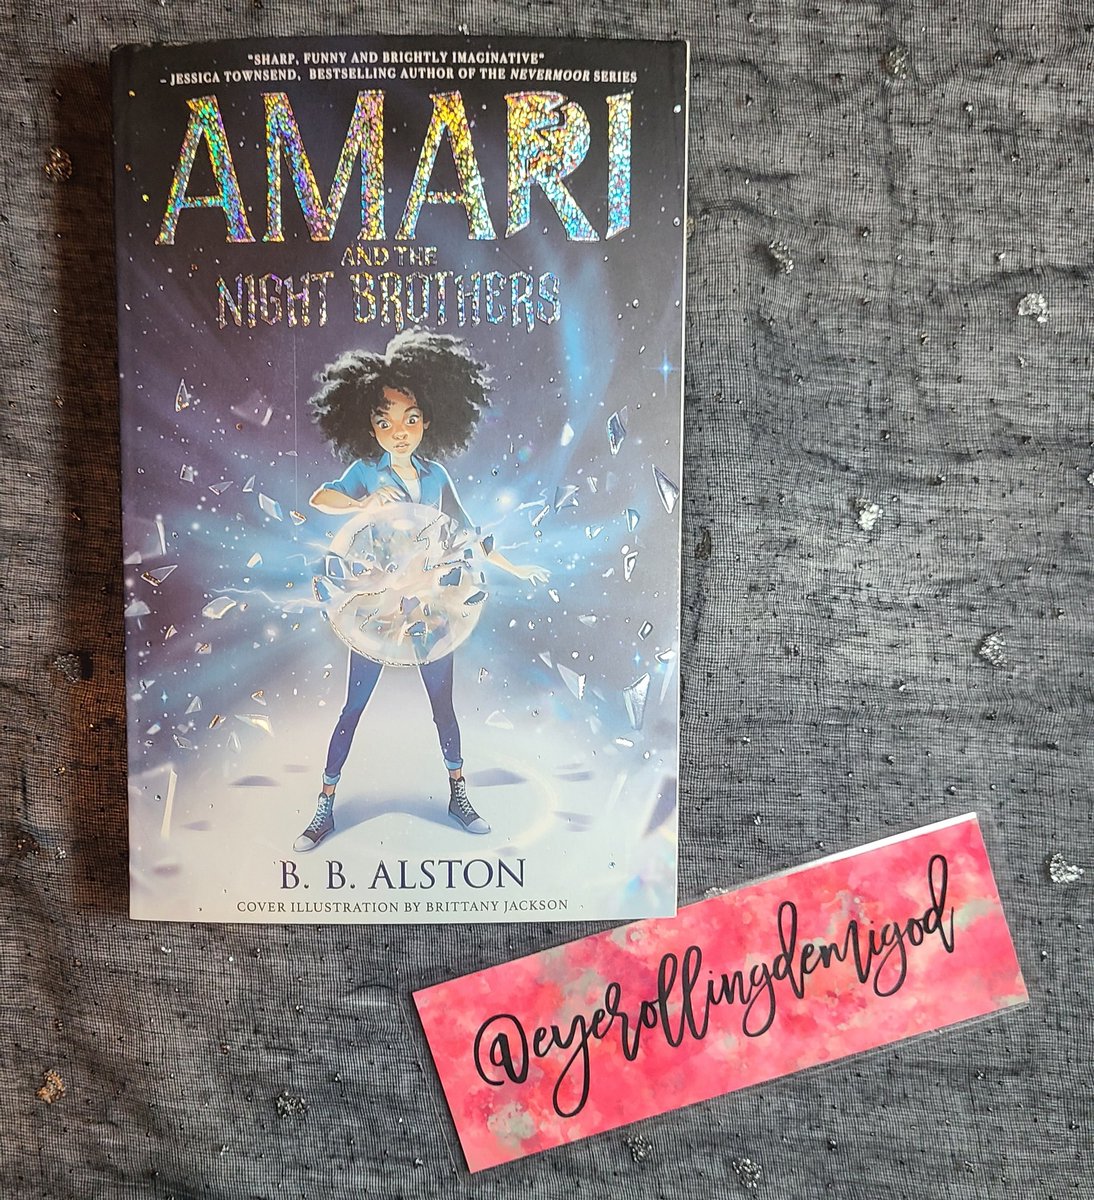 Today's featured book is #AmariAndTheNightBrothers by #BBAlston - check out the link below for my full #BookReview ⬇️ #KidLit #MiddleGradeReads #SciFi #Fantasy #SupernaturalInvestigations #RepresentationMatters #DiversifyYourShelf 

eyerollingdemigod.com/2022/02/amari-…